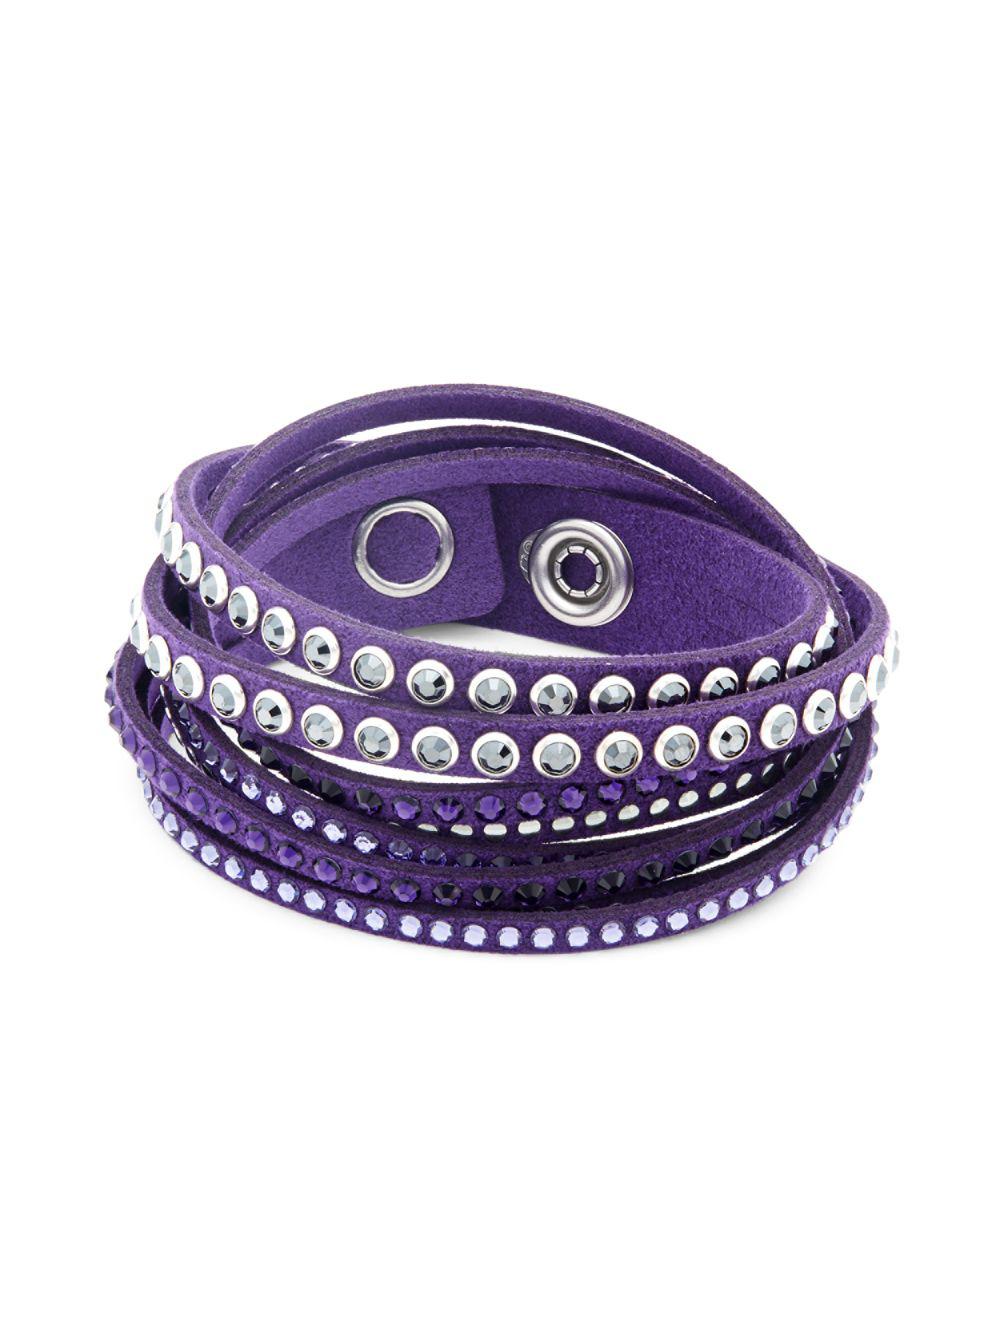 Swarovski The Iconic Crystal And Leather Bracelet in Purple - Lyst